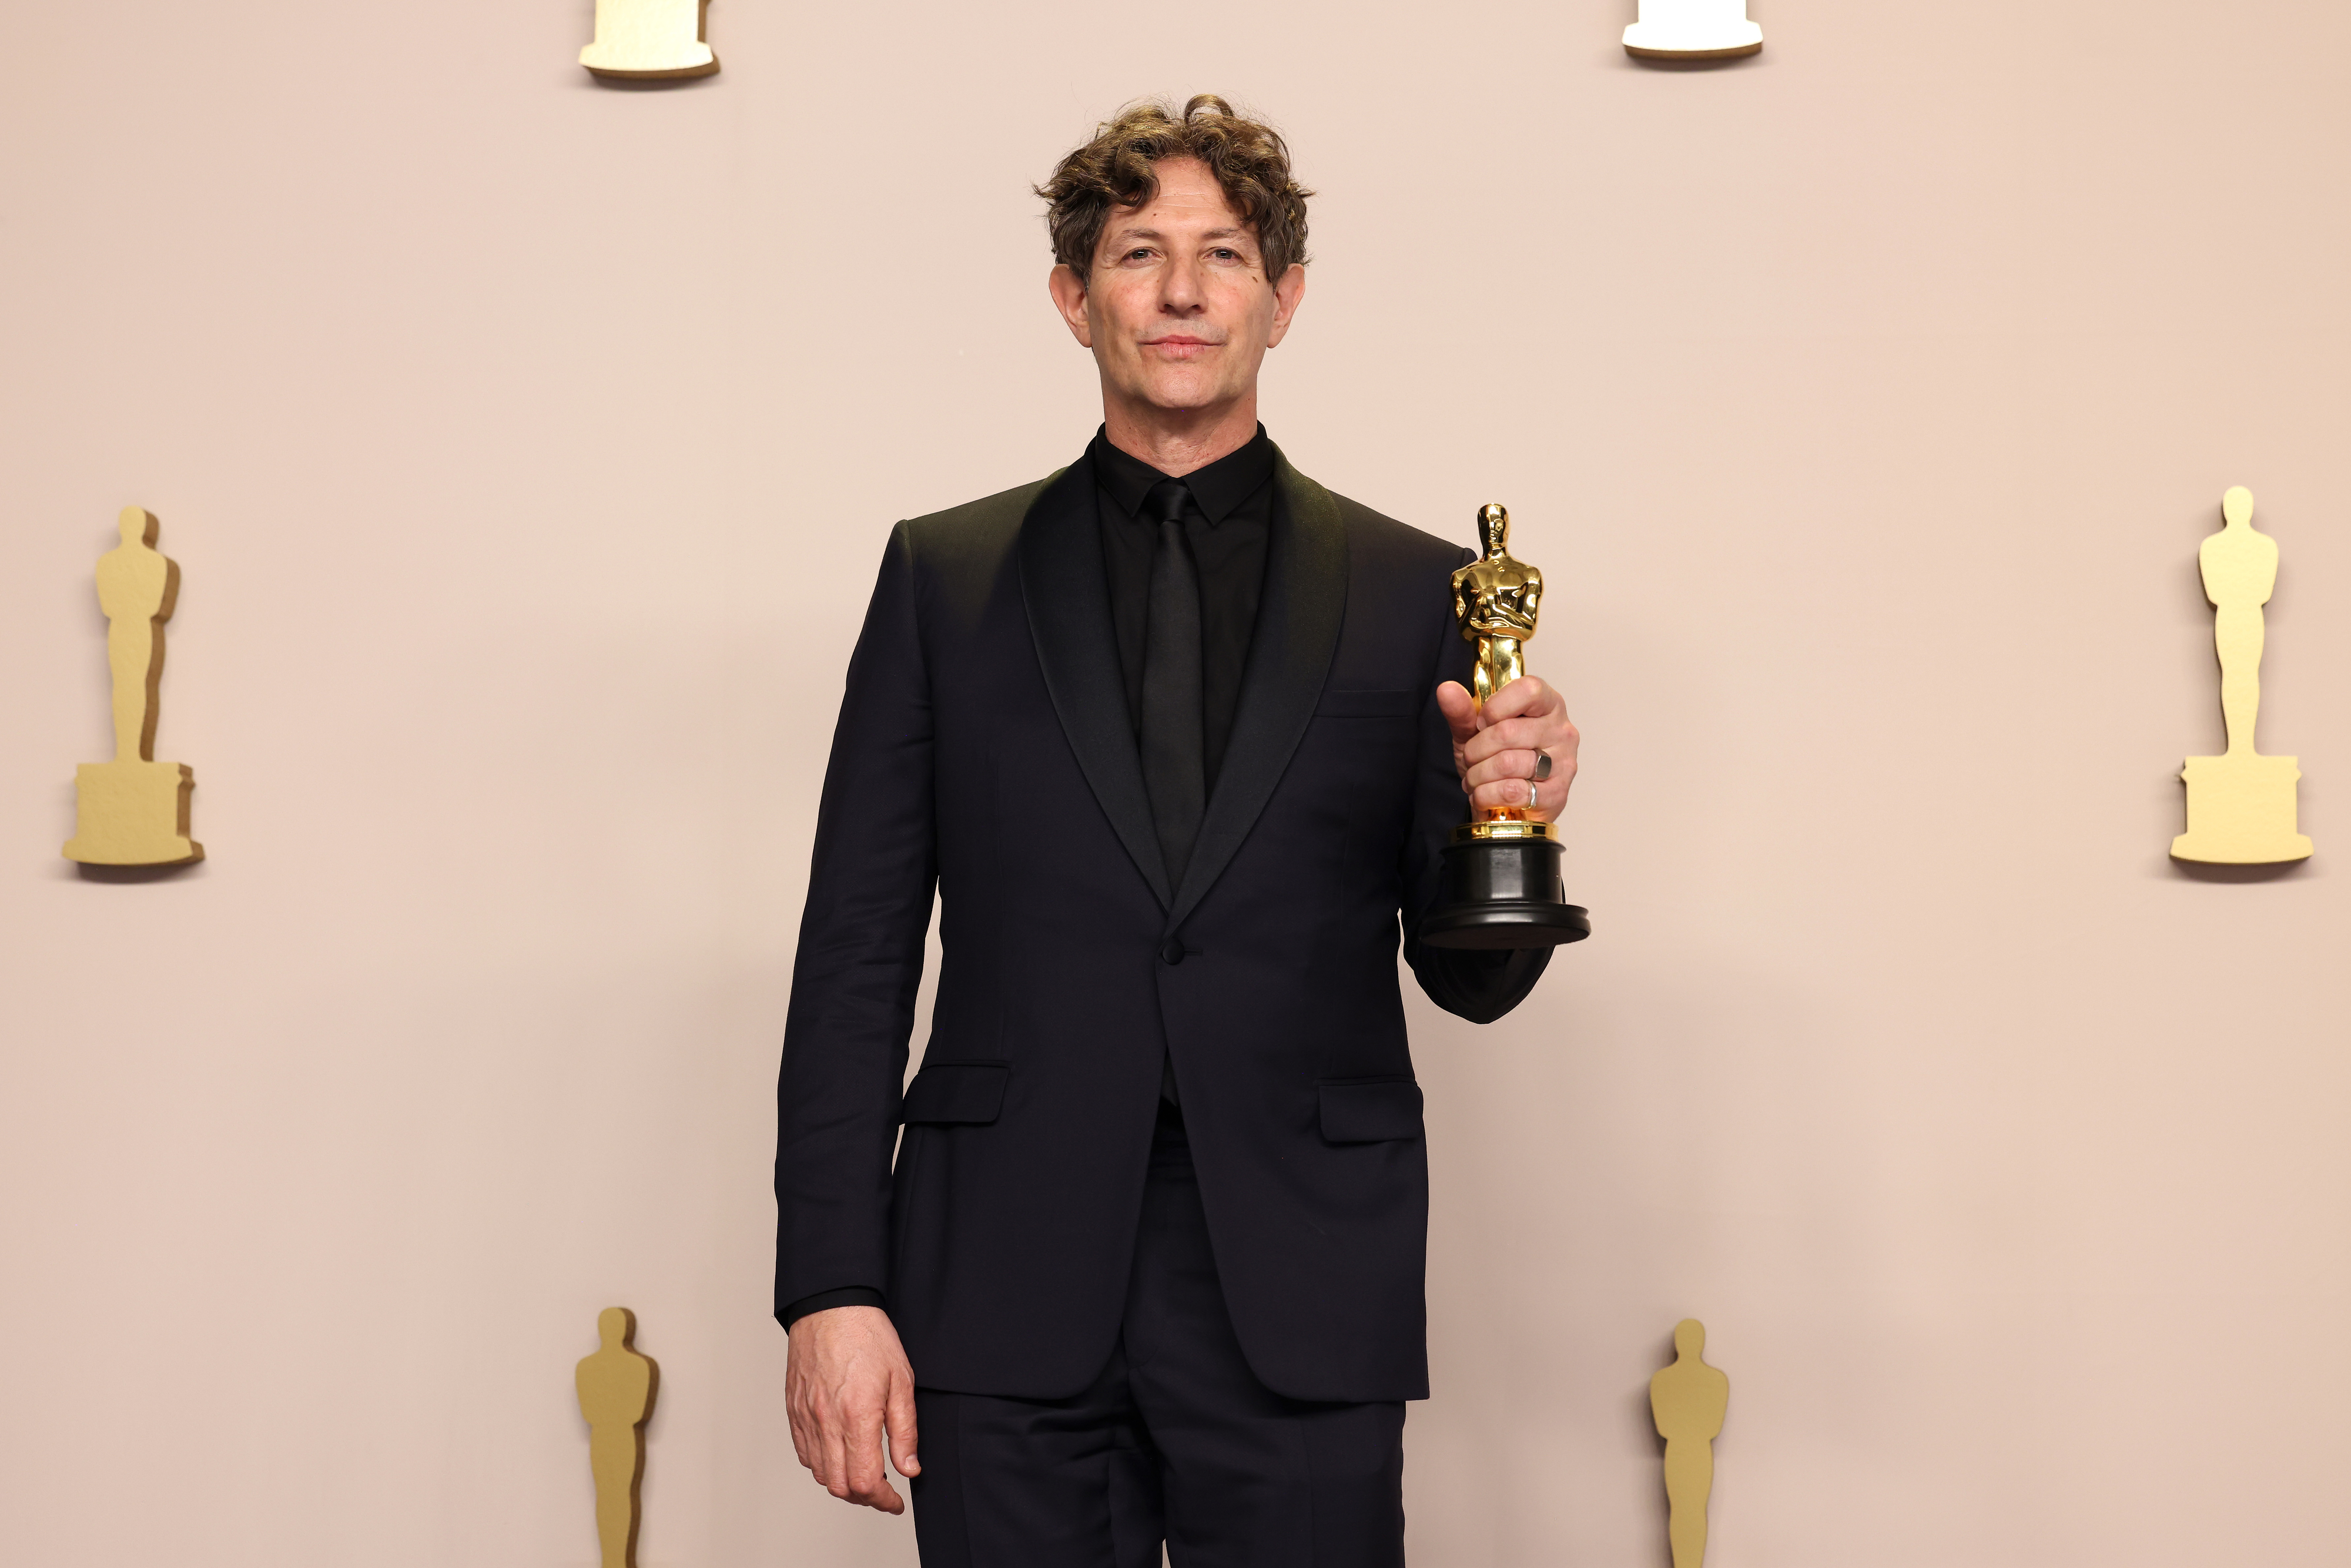 Jonathan holding an Oscar trophy, dressed in a black suit and tie, standing in front of statue silhouettes